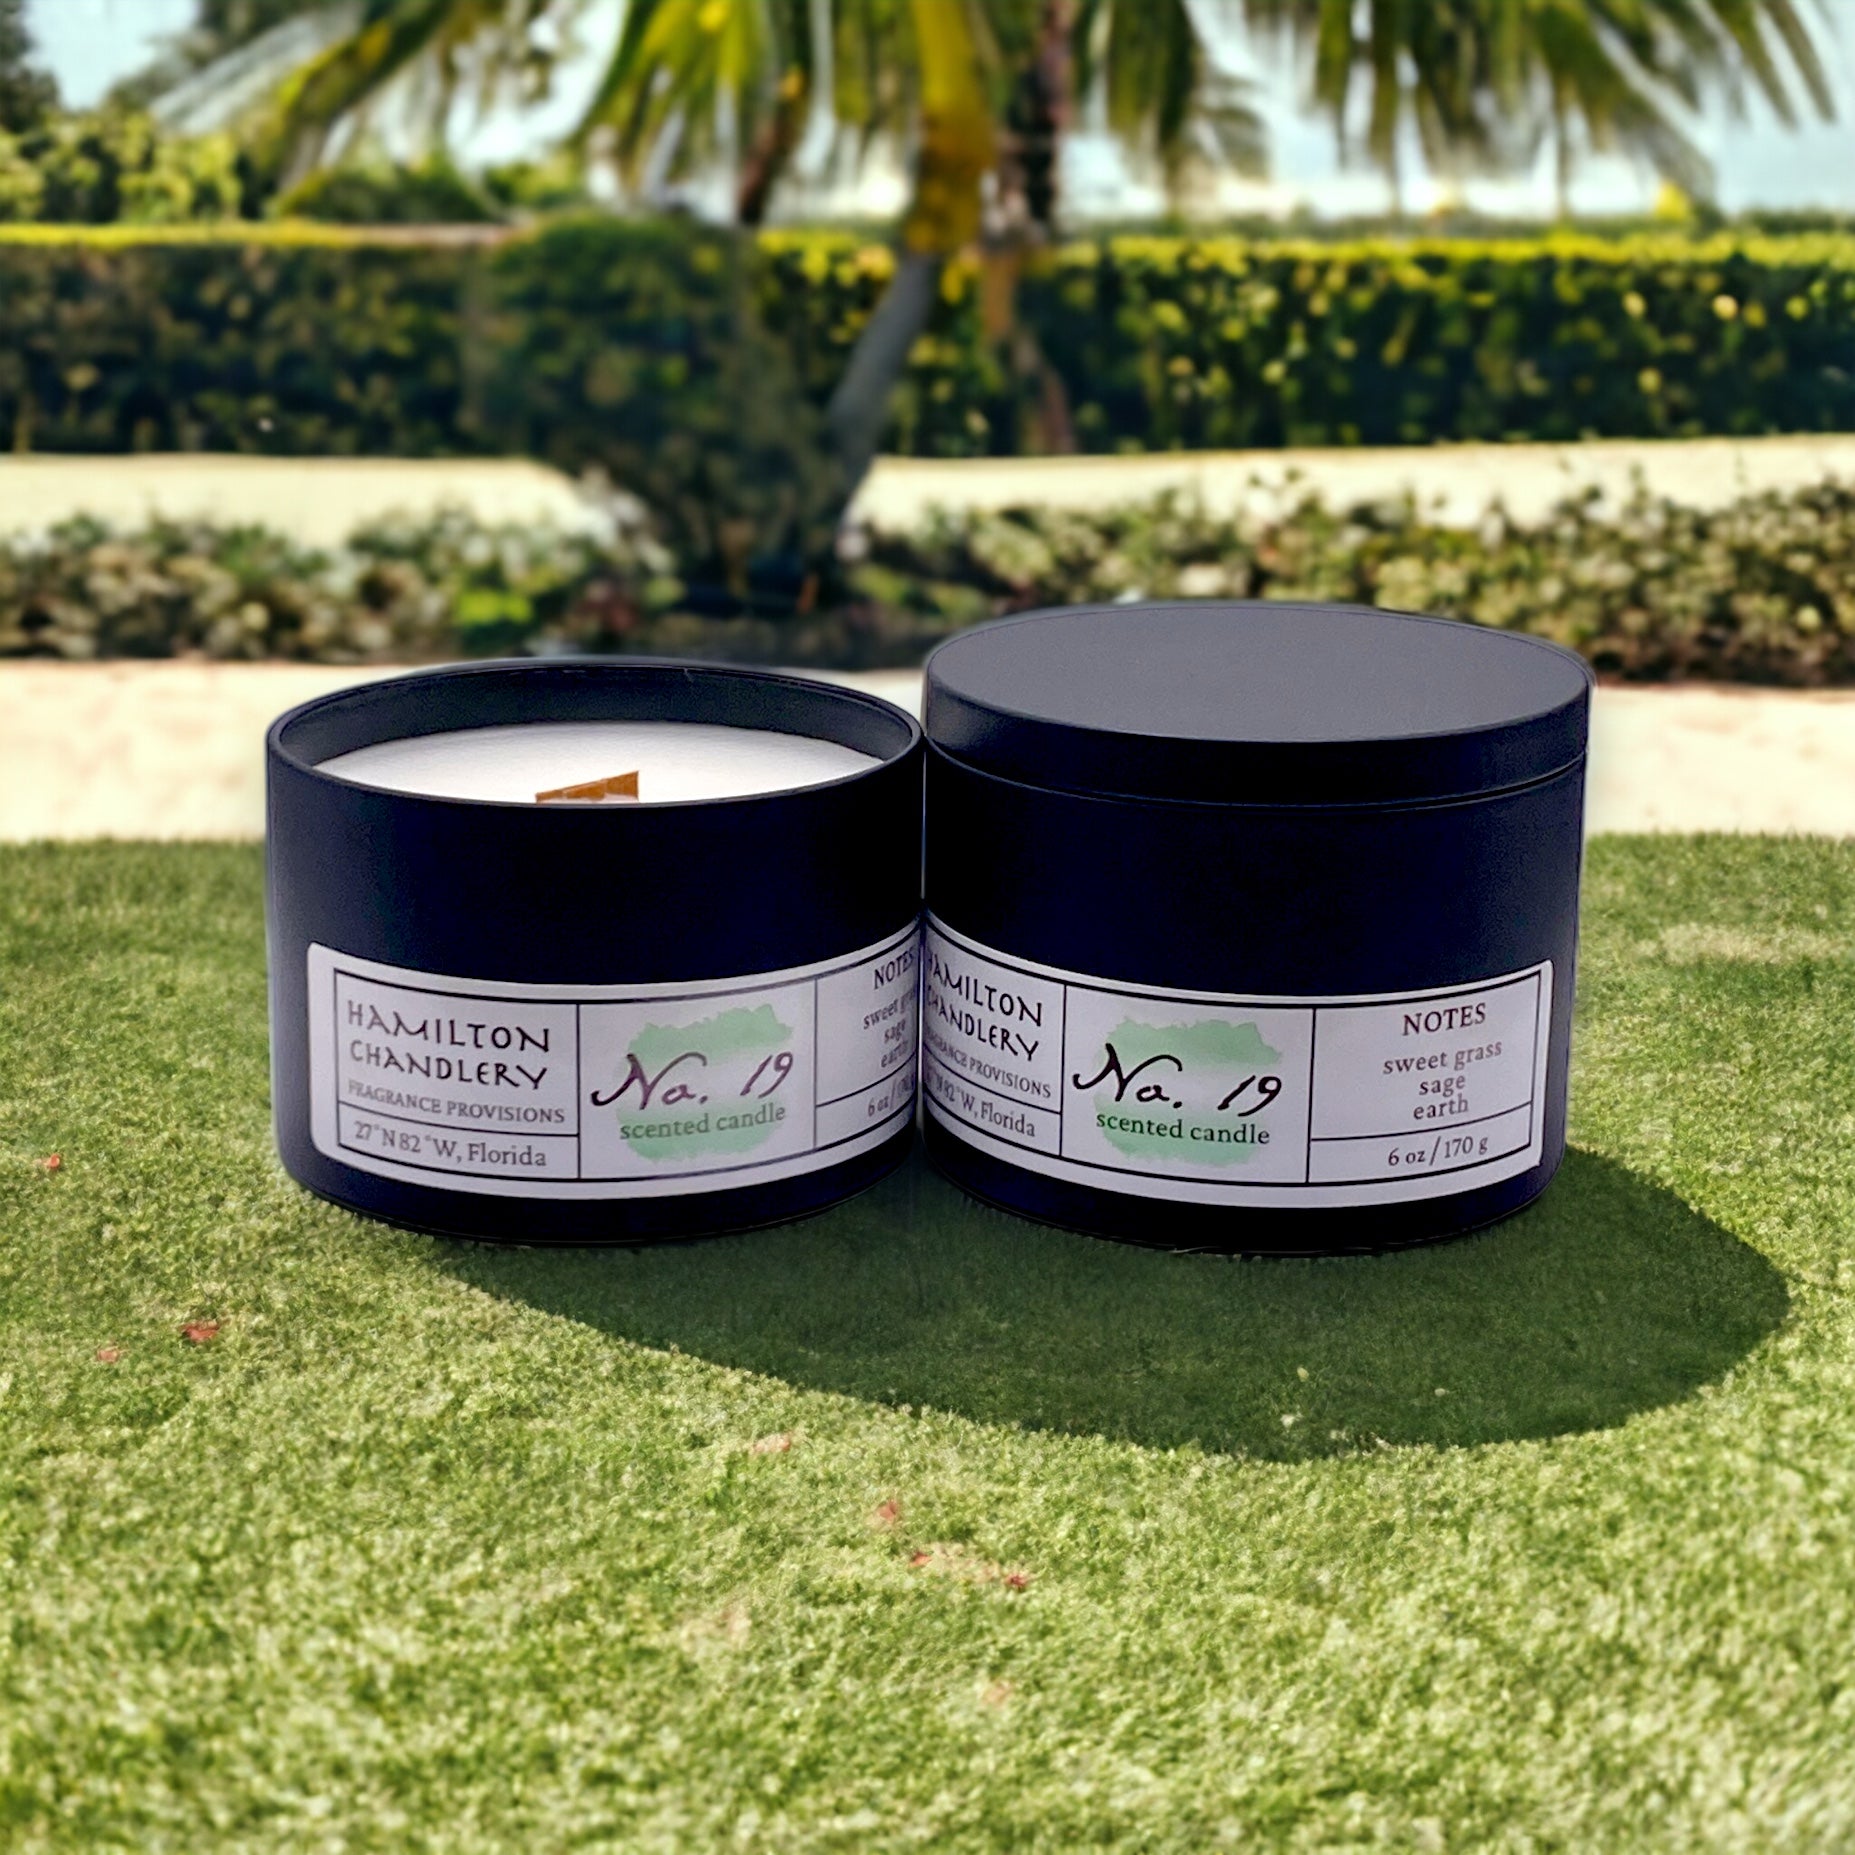 Fragrance No. 19 Travel Tin Candles on Fresh Cut Grass with Palm Trees in Background | Hamilton Chandlery